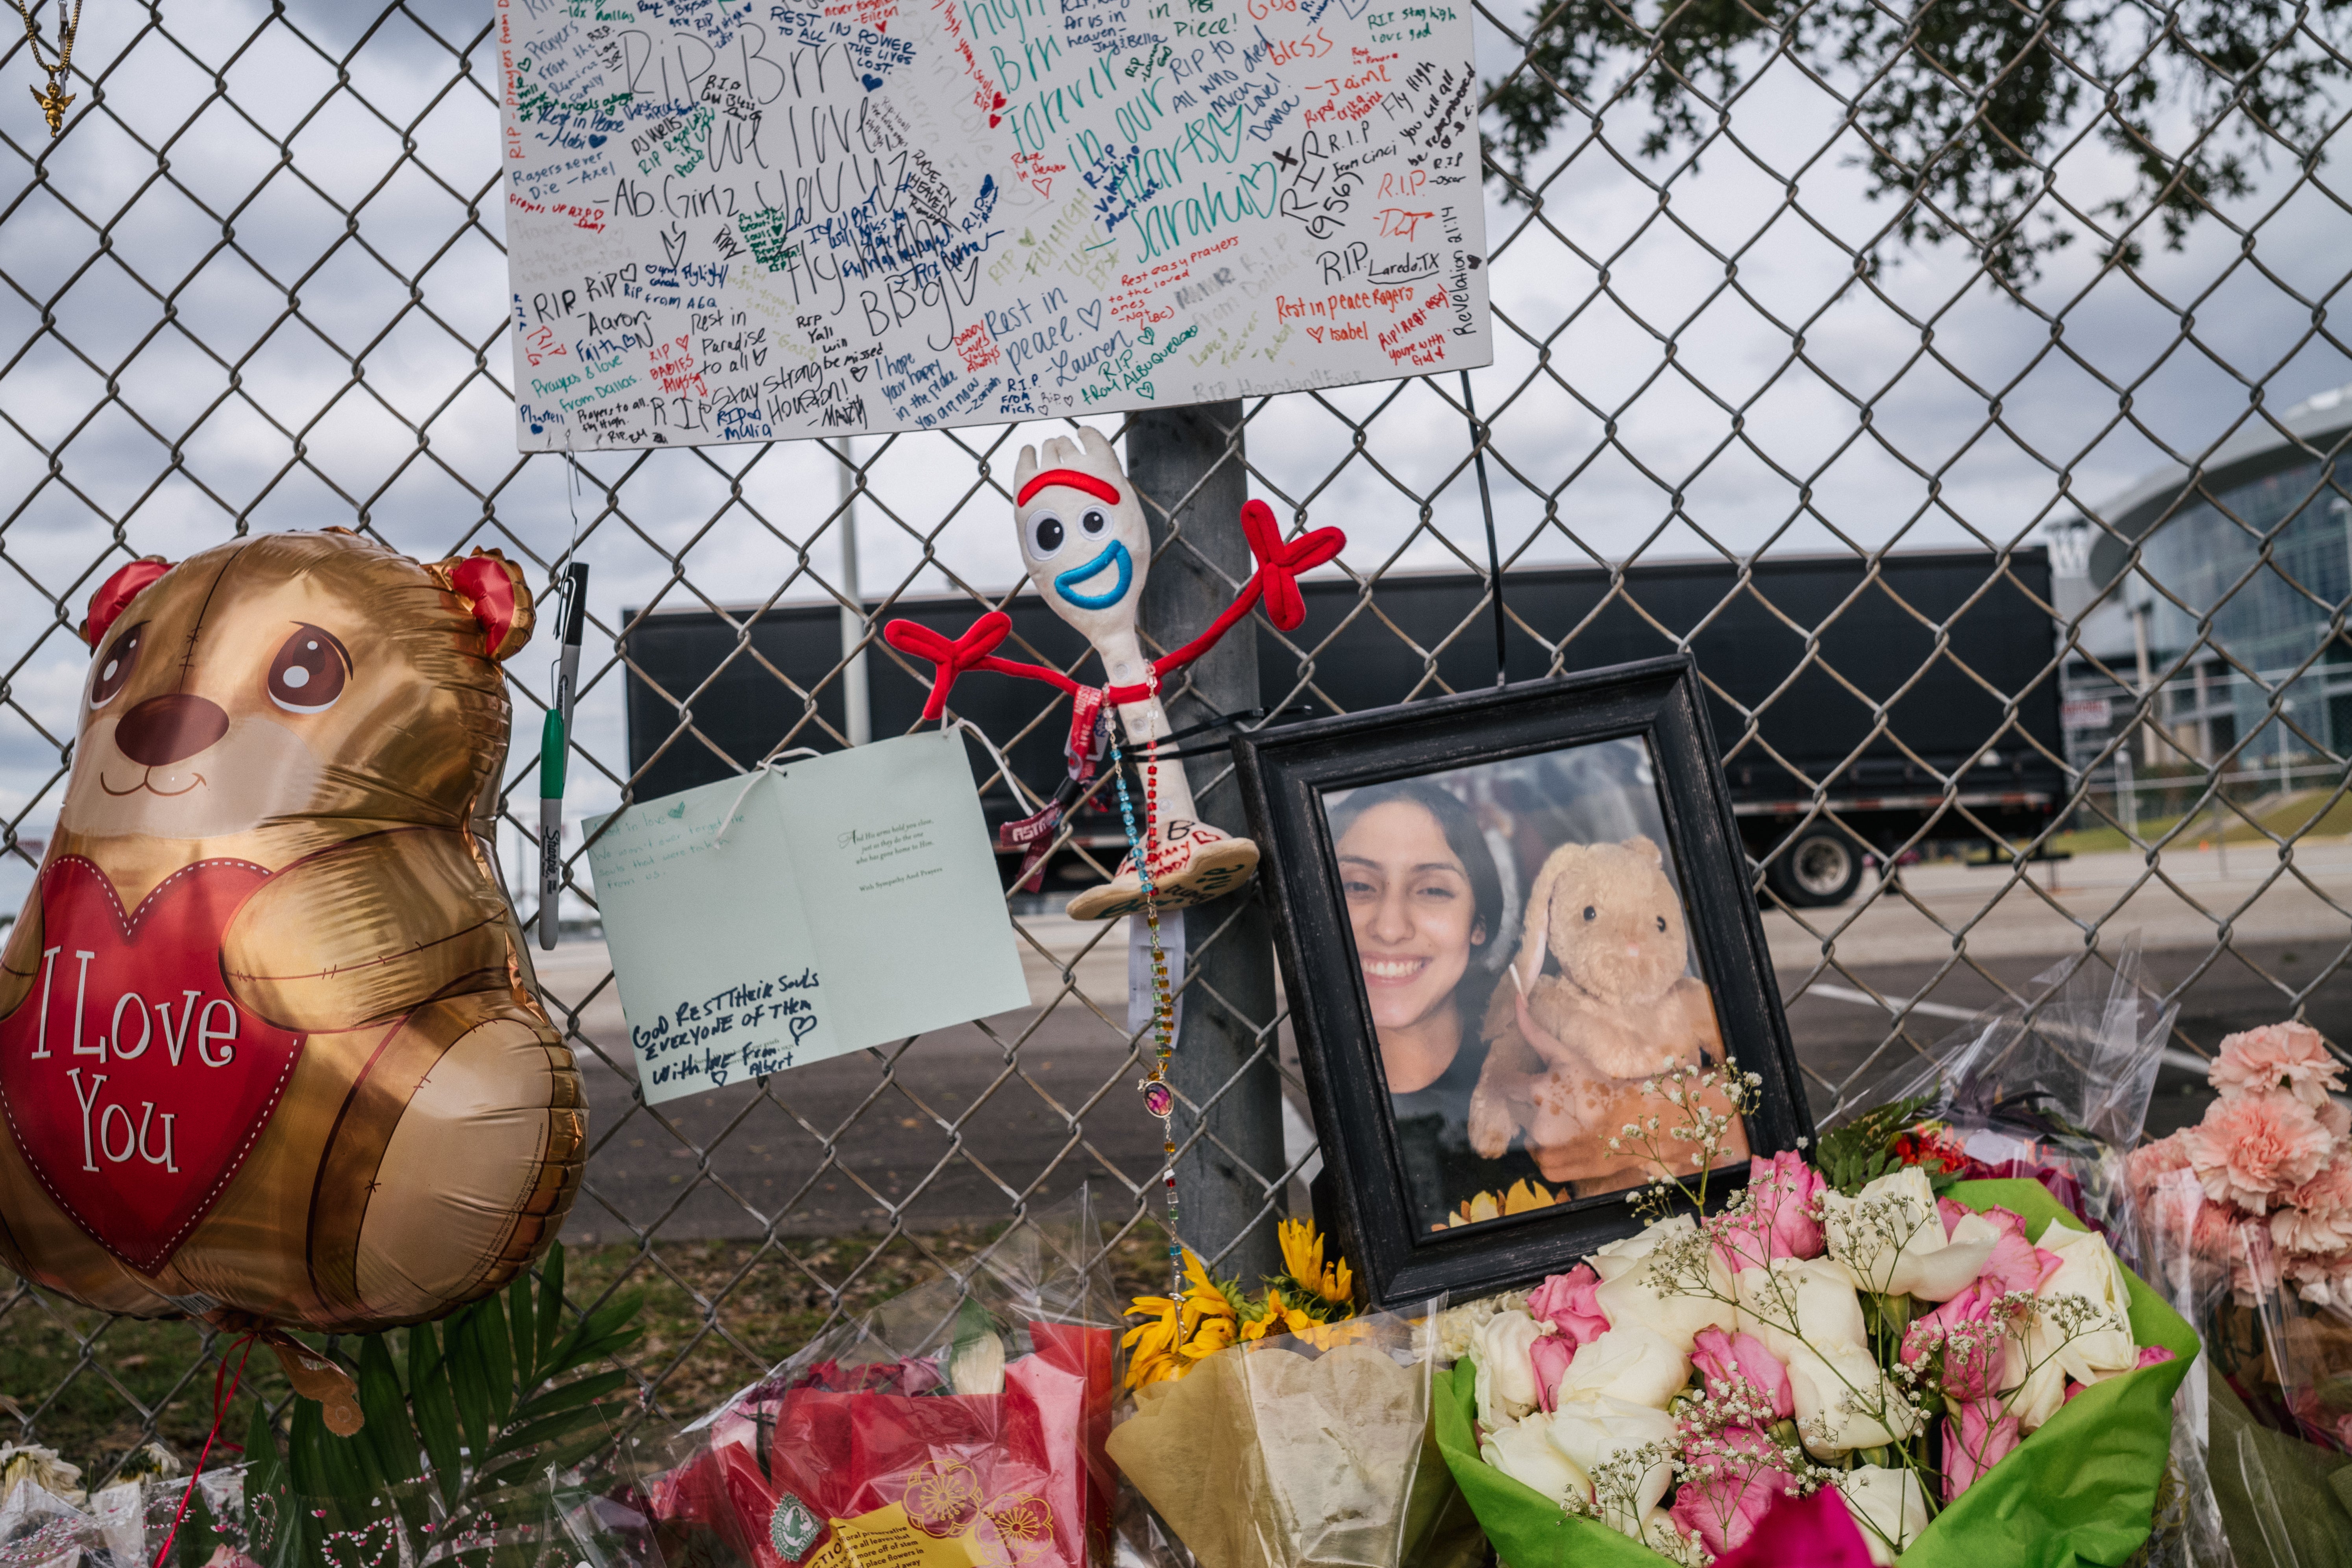 A memorial outside of NRG Park for the victims killed in the horror at Astroworld